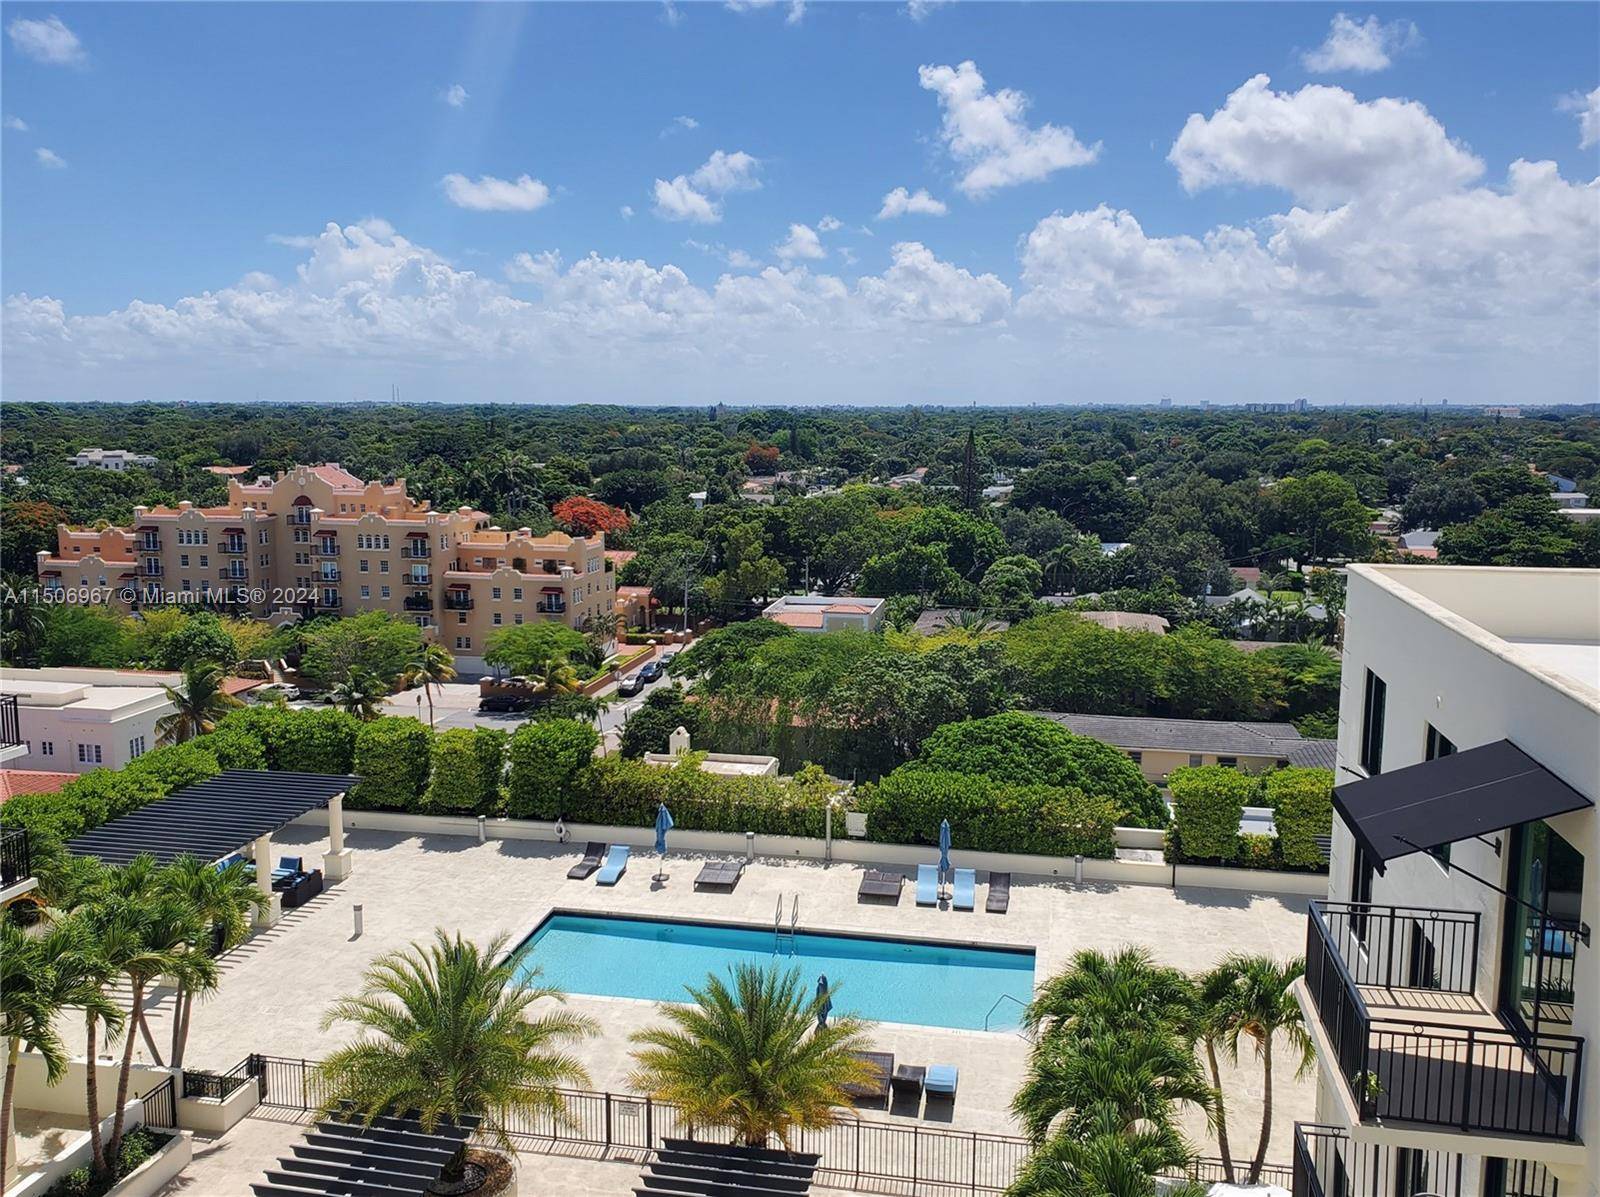 Beautiful furnished Condo in the heart of Coral Gables conveniently located minutes away from Miracle Mile restaurants, shops, and businesses, Urban Life At Its Best.